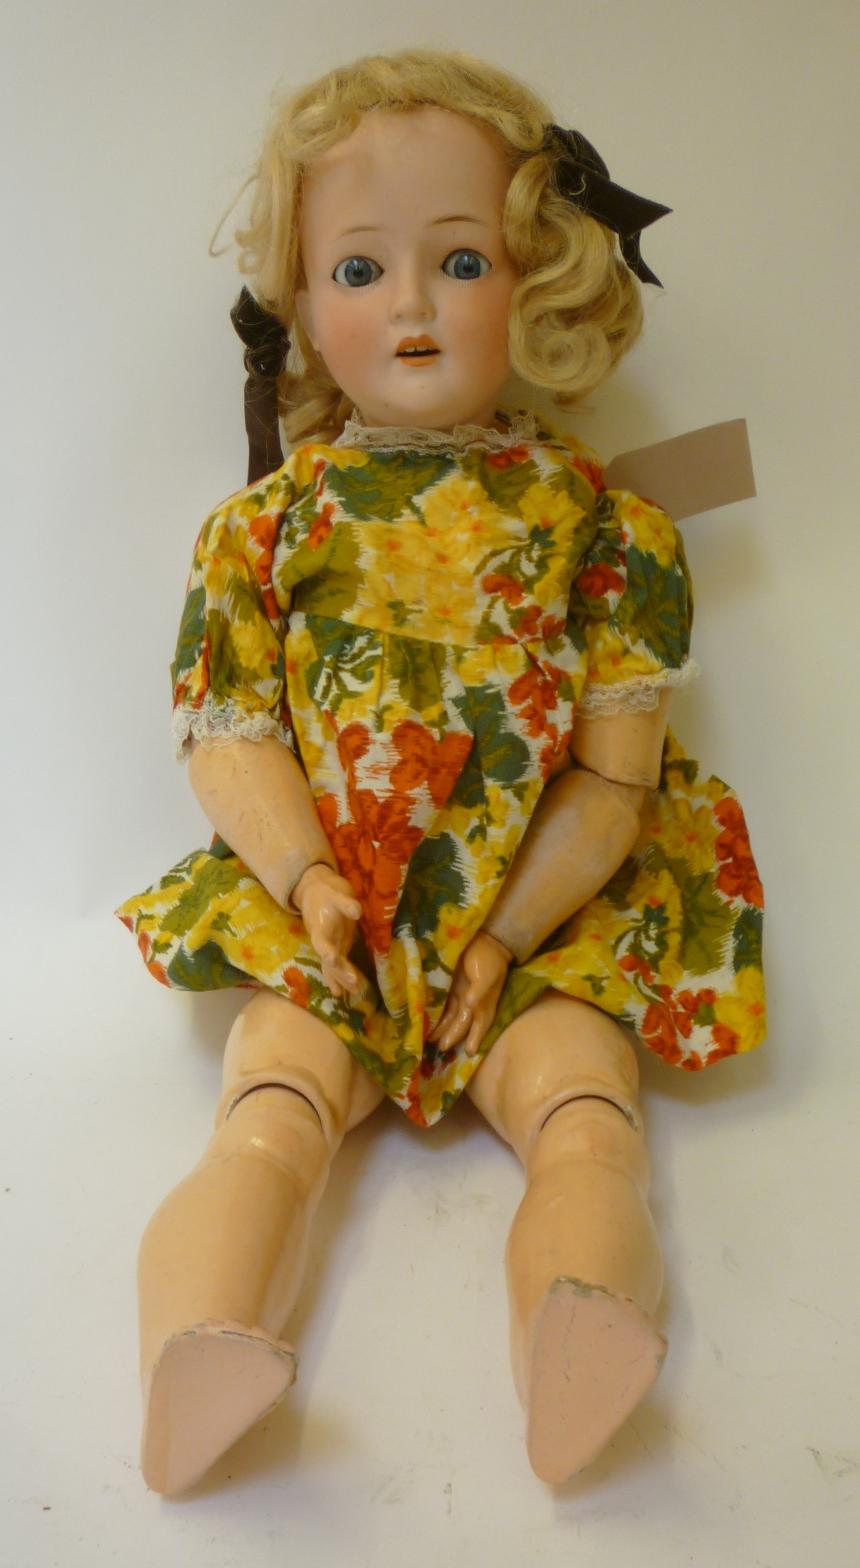 A German bisque "Revalo" type doll with blue glass sleeping eyes, open mouth and teeth, blonde